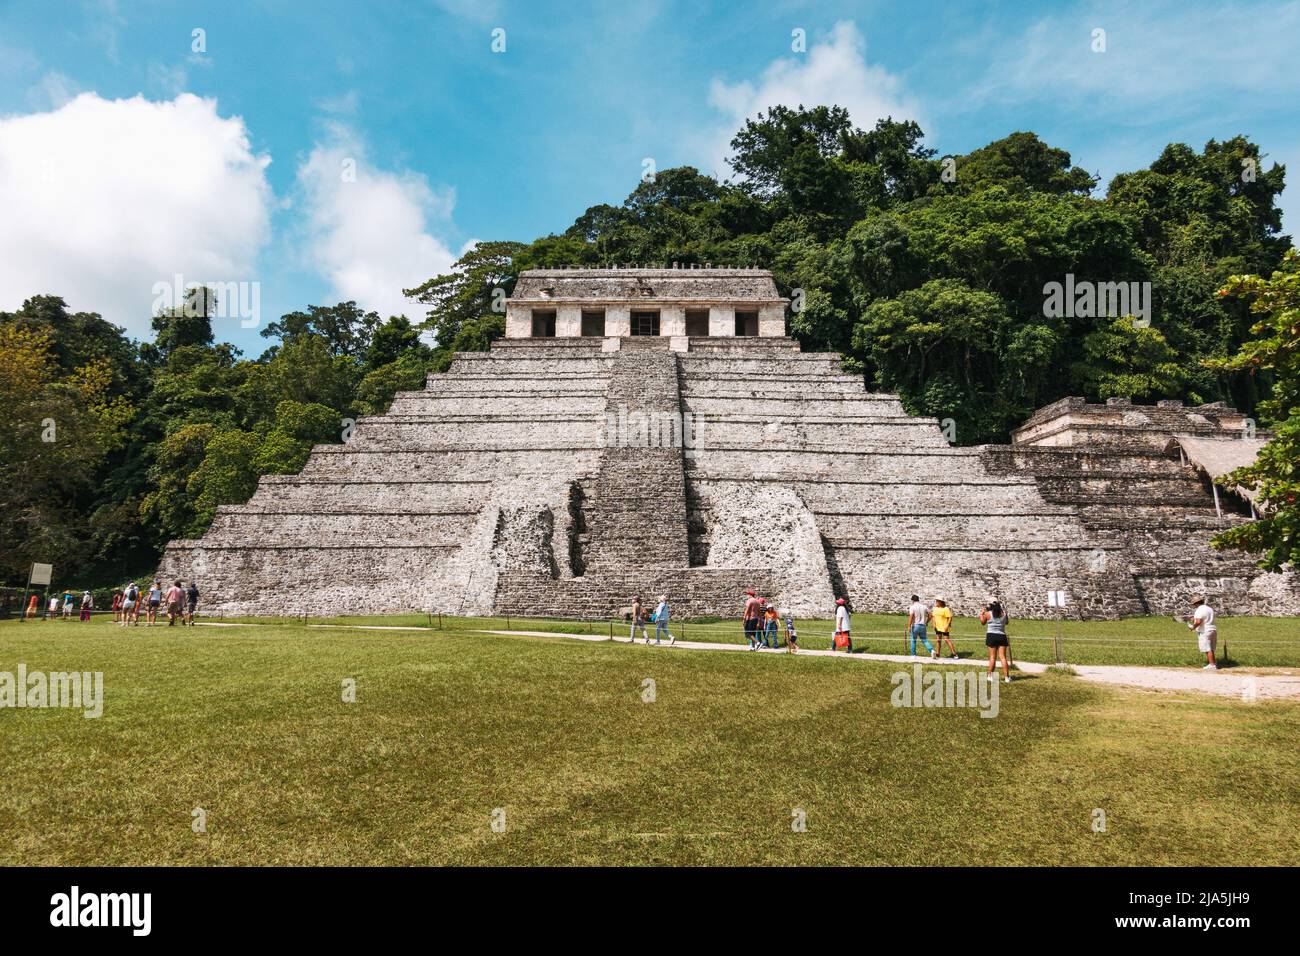 tourists walk past Temple of the Inscriptions, the largest ancient Mayan pyramid at the Palenque Archaeological Zone in the state of Chiapas, Mexico Stock Photo